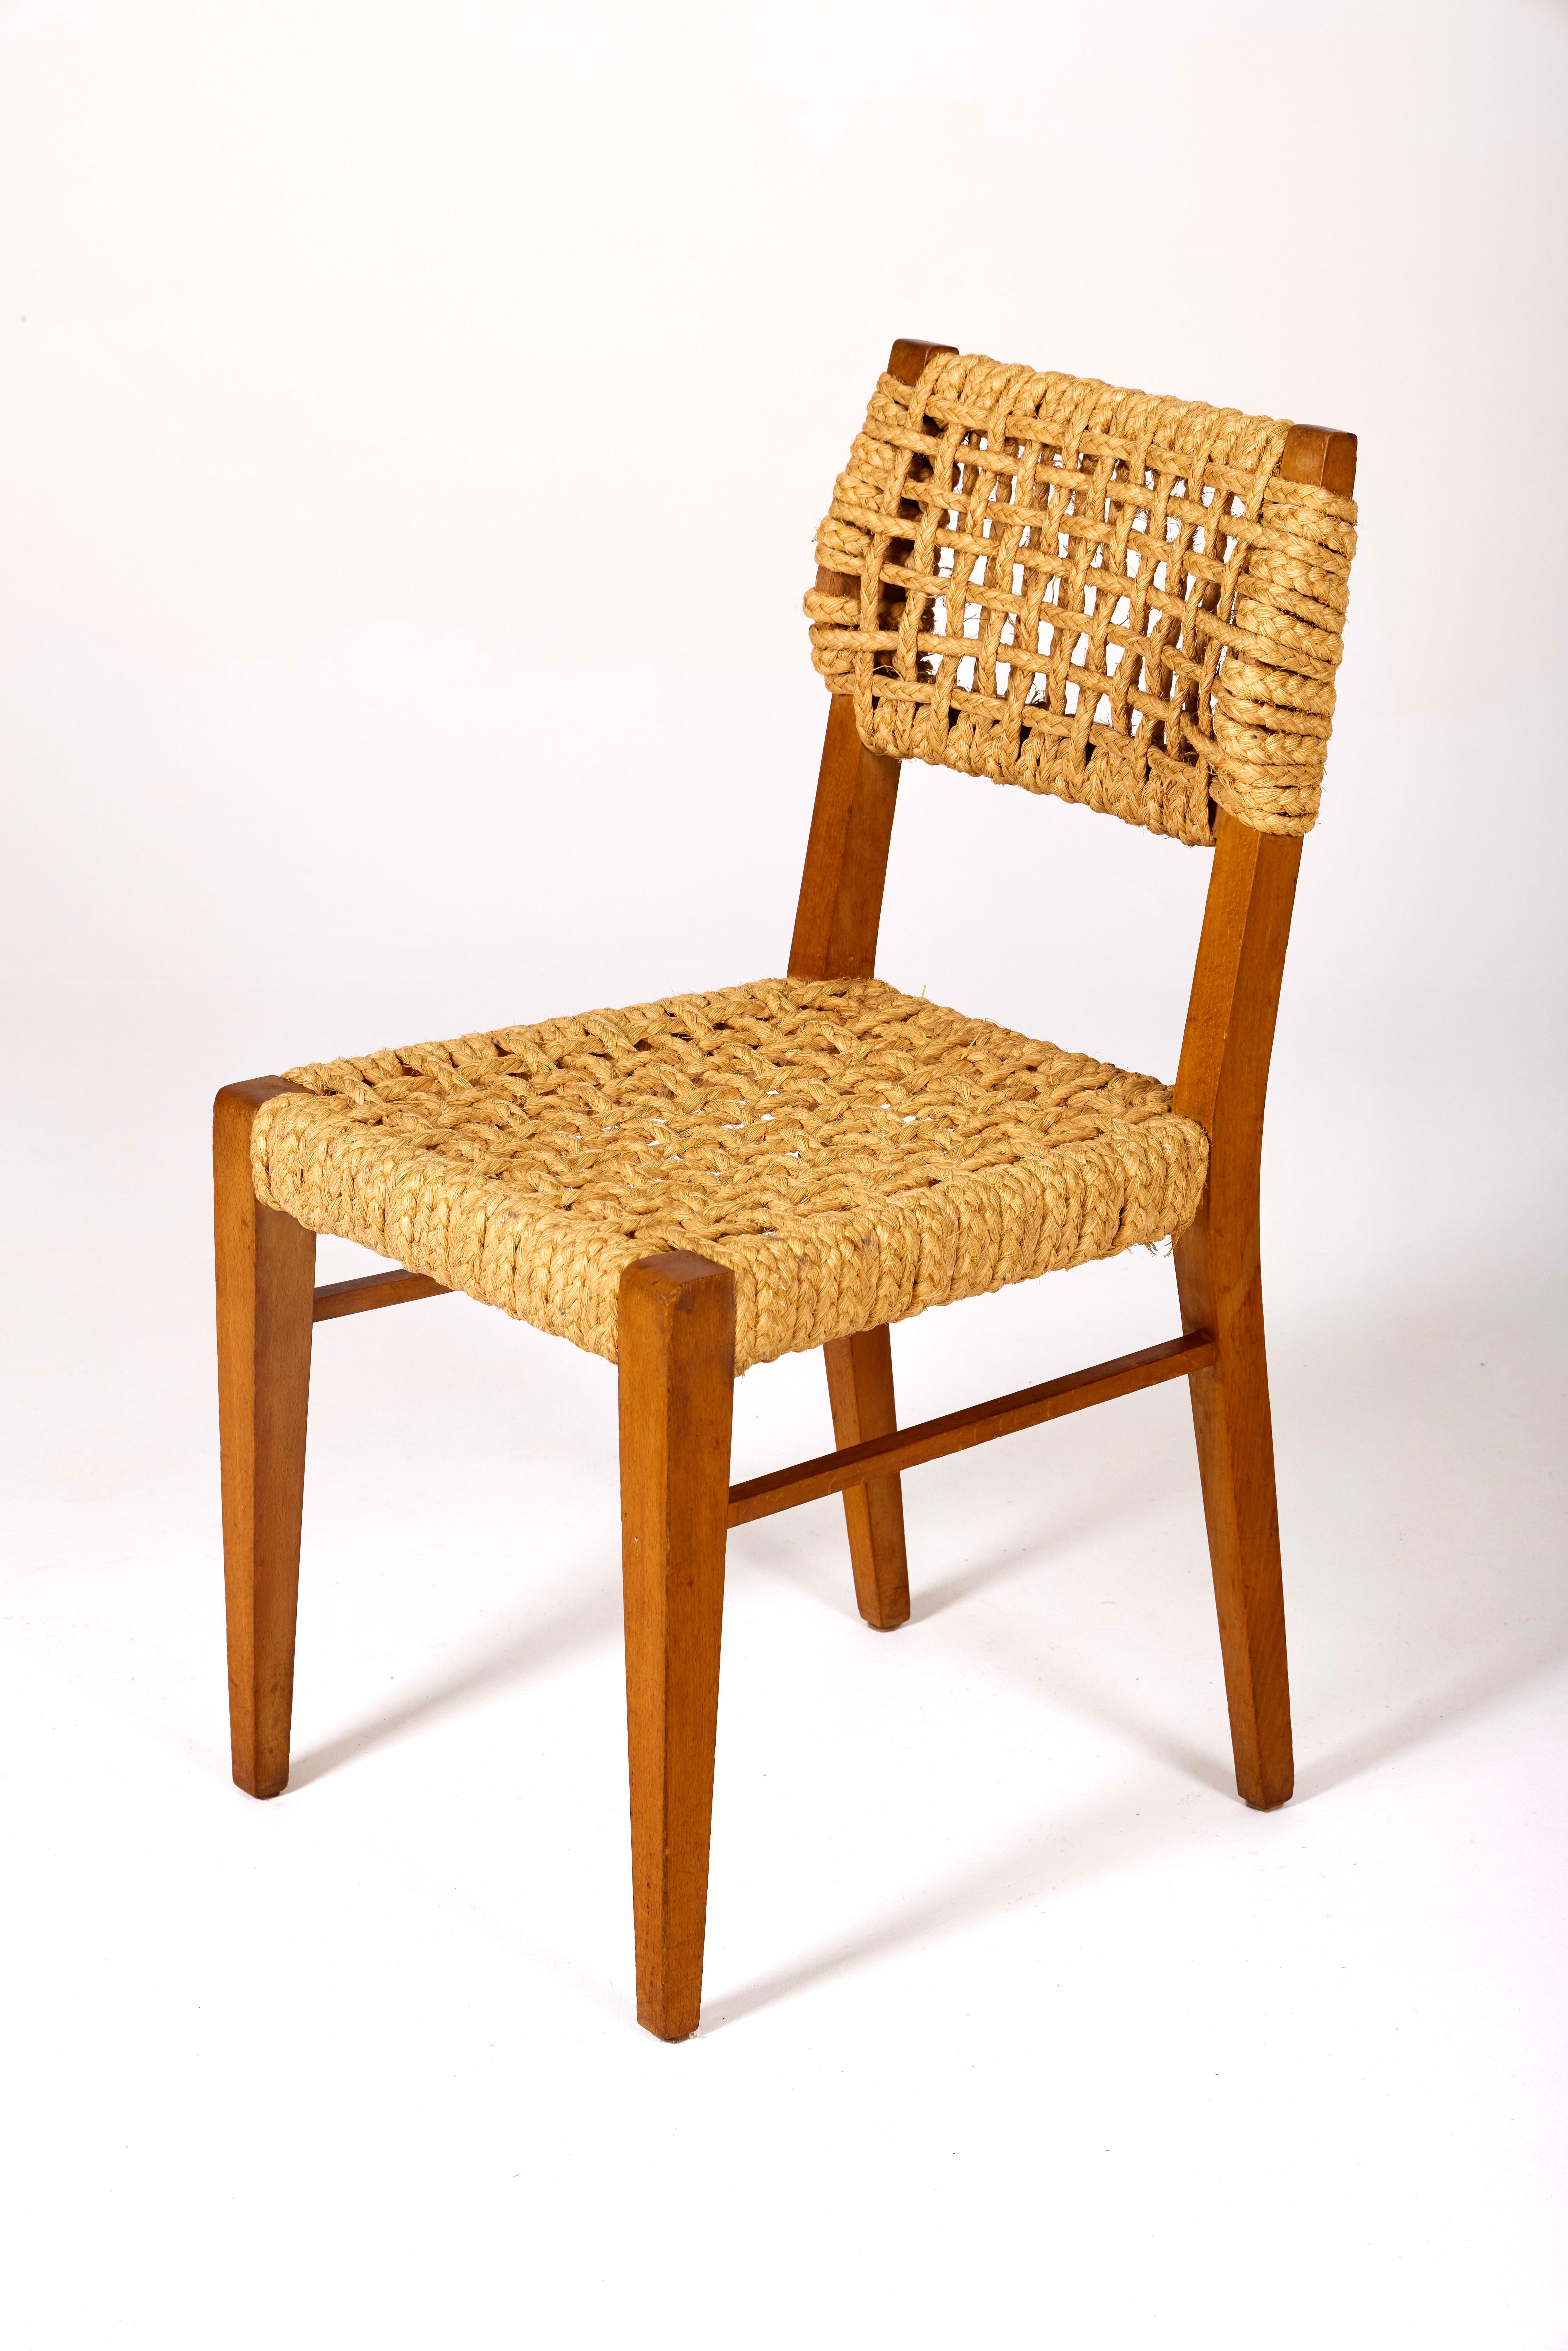 Chair by the French designer couple Adrien Audoux & Frida Minet, from the 1950s. The backrest and seat are made of woven hemp, and the base is wooden. Overall good condition with some signs of wear on the weaving. Two chairs available.
LP1182